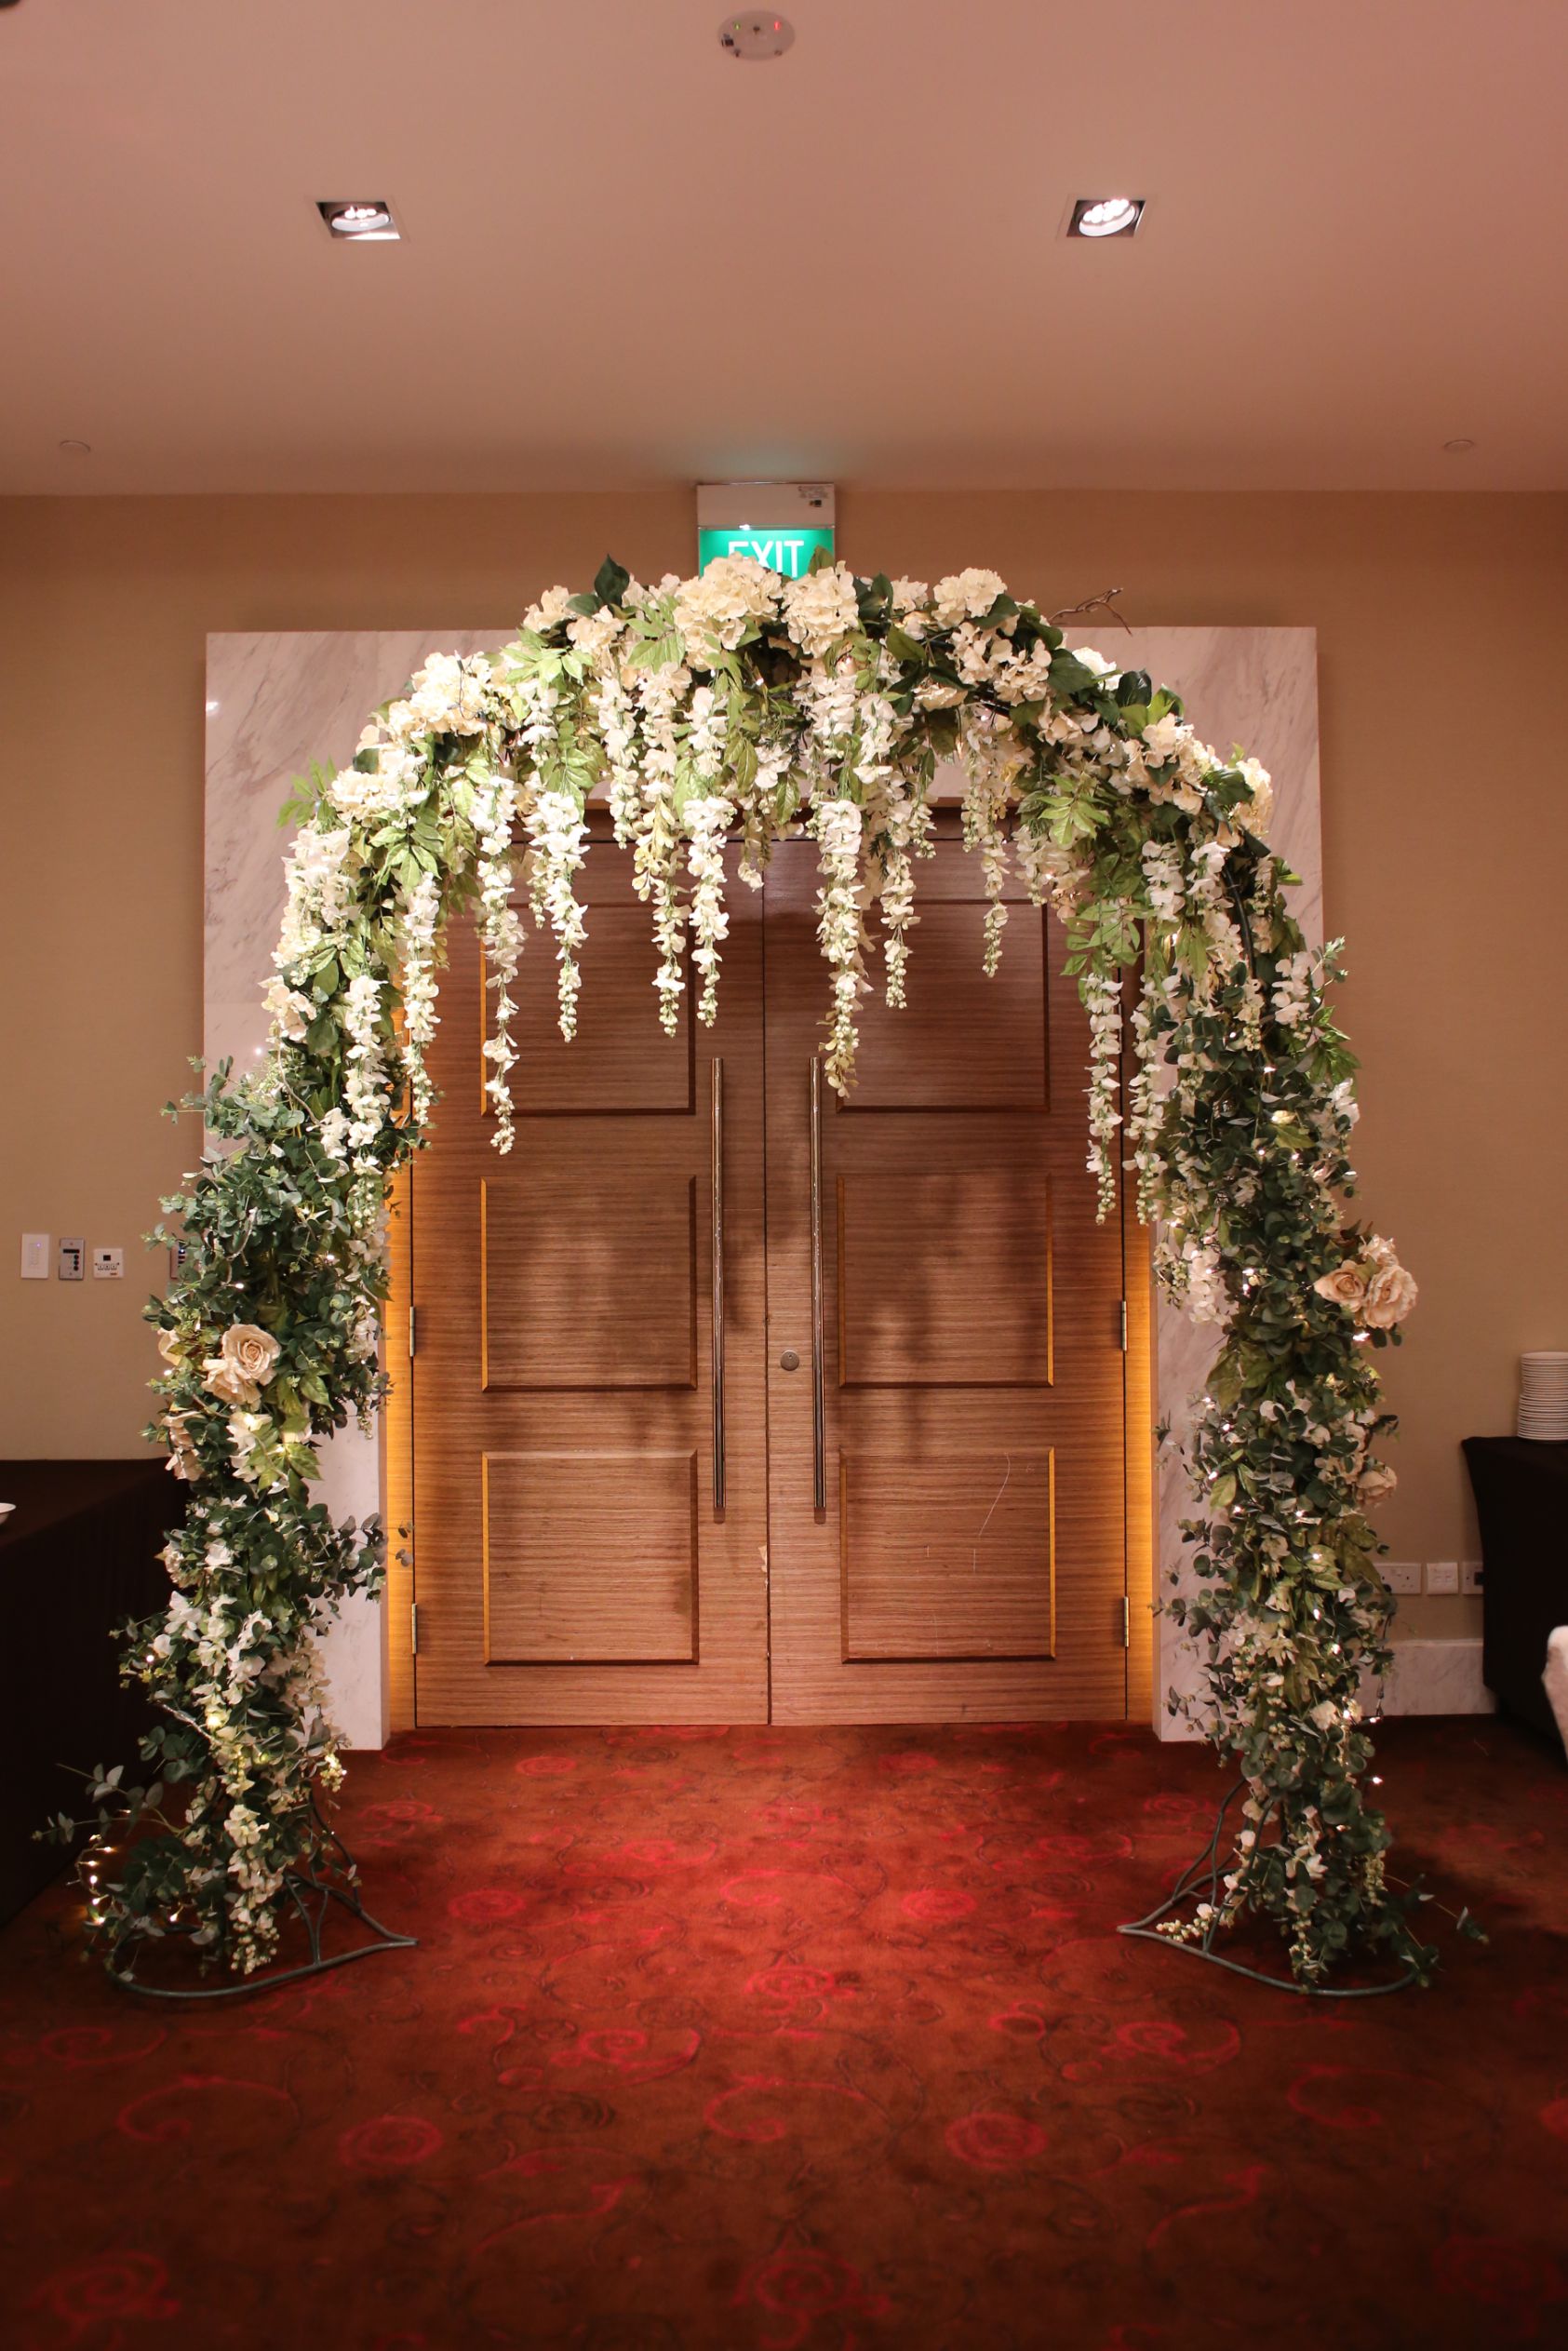 Hotel Fort Canning Wedding Venue Singapore Hold Your Wedding Here